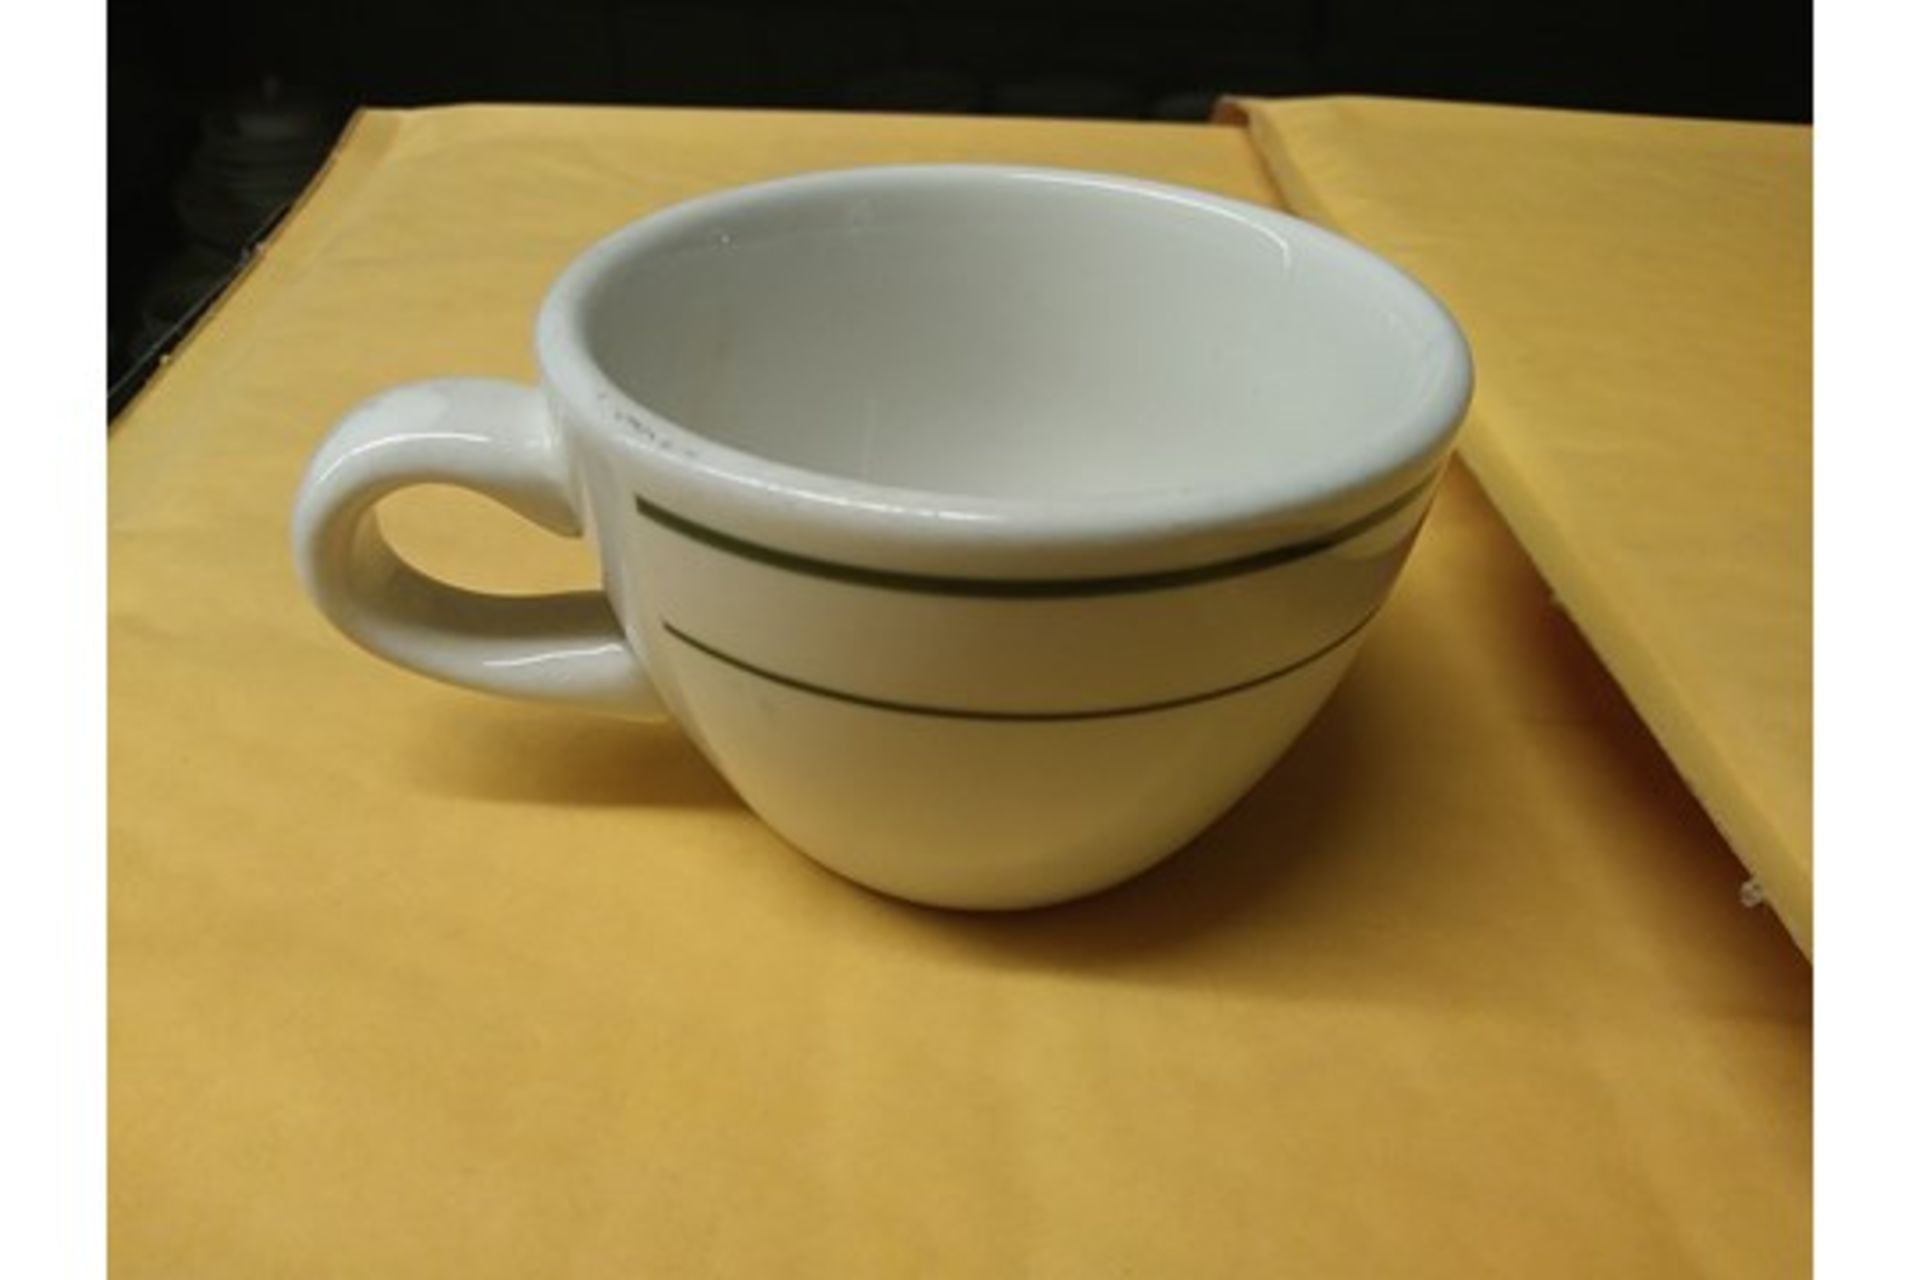 BUFFALO CHINA 3.75" TEA CUP (D-14) (includes approx QTY 34 in this lot)